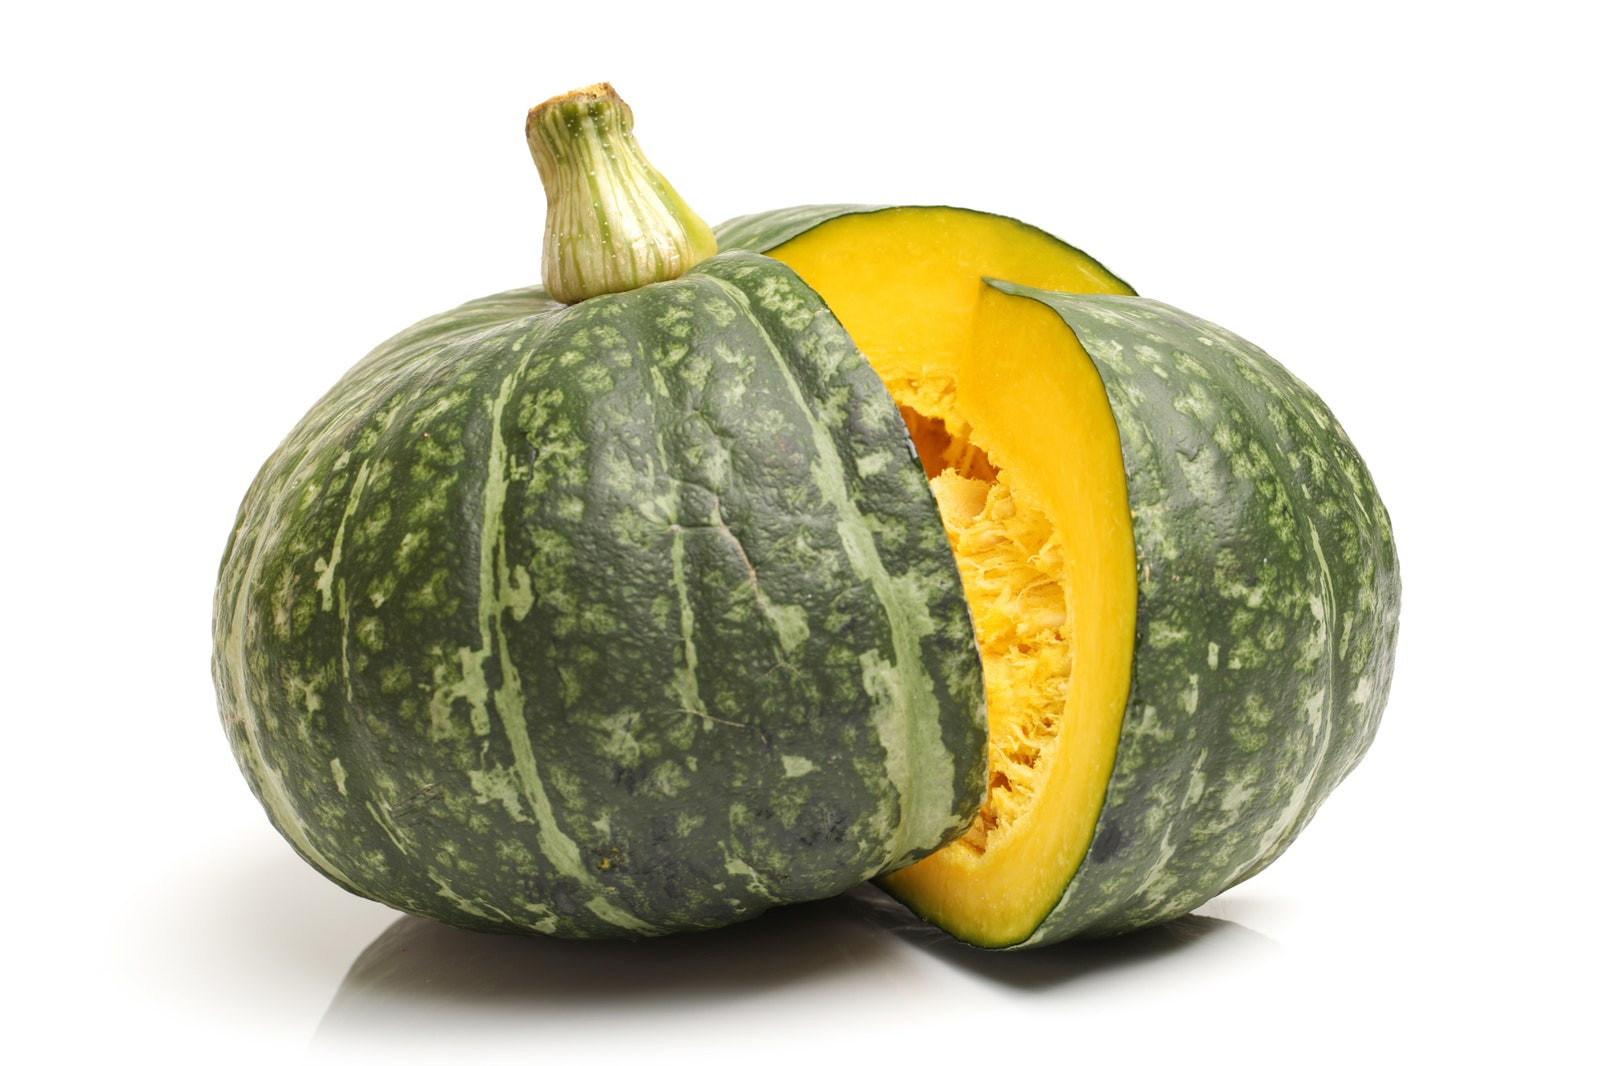 Winter Squash Types
 A Visual Guide to Winter Squash Varieties